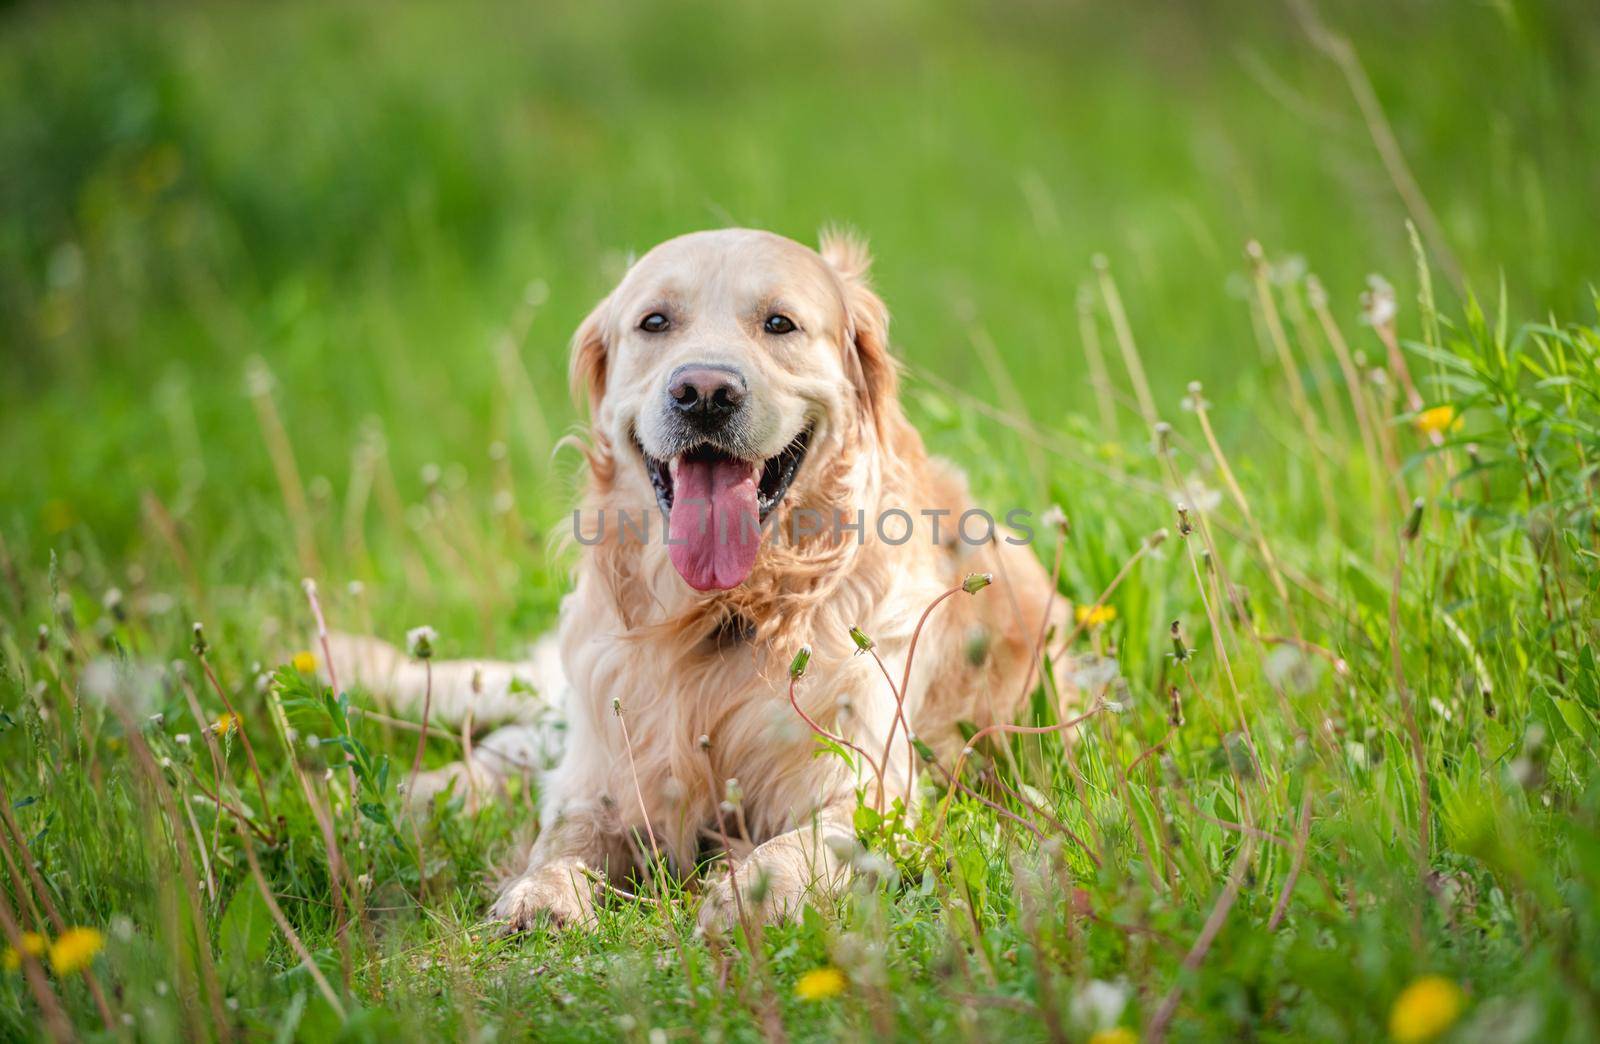 Golden retriever dog lying in green grass outdoors in sunny day in summer time. Adorable doggy pet resting during walk outside